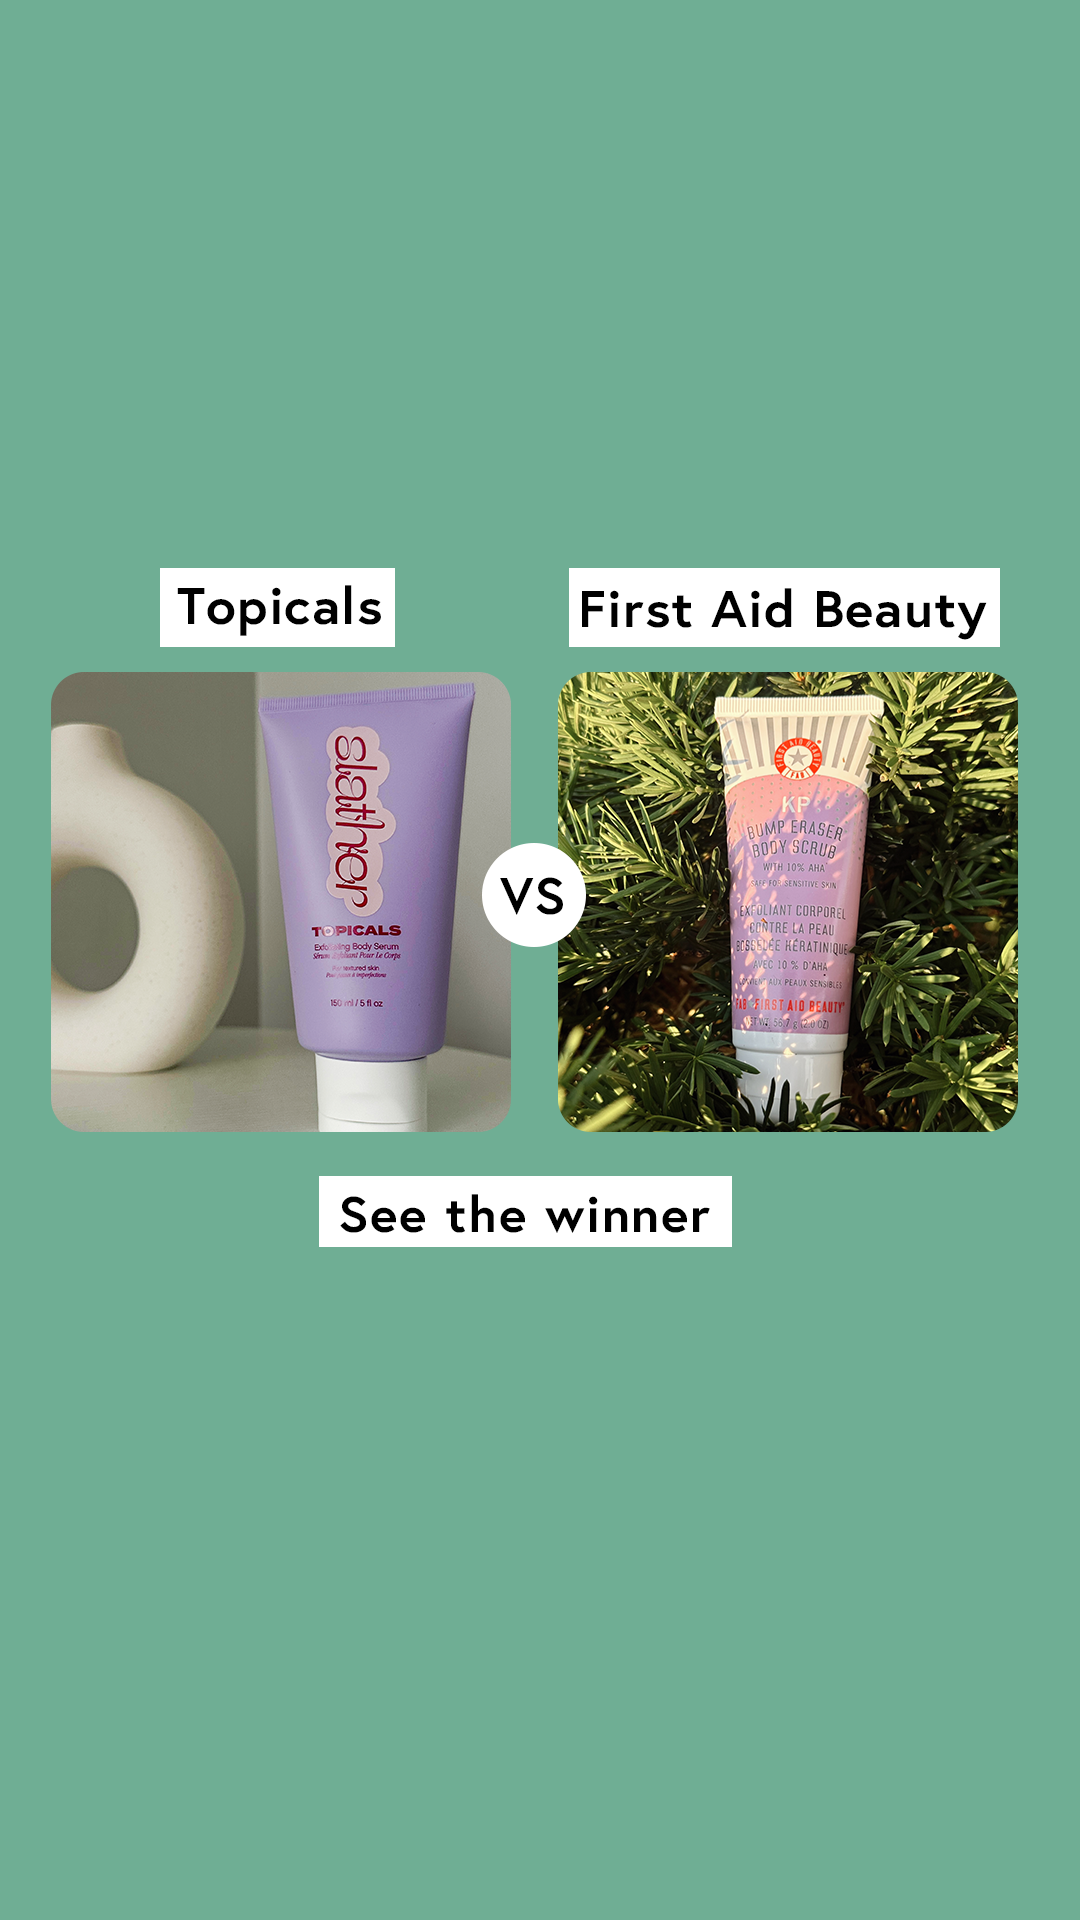 Topicals vs. First Aid Beauty: Which Skincare Product Transforms Rough, Textured Skin?